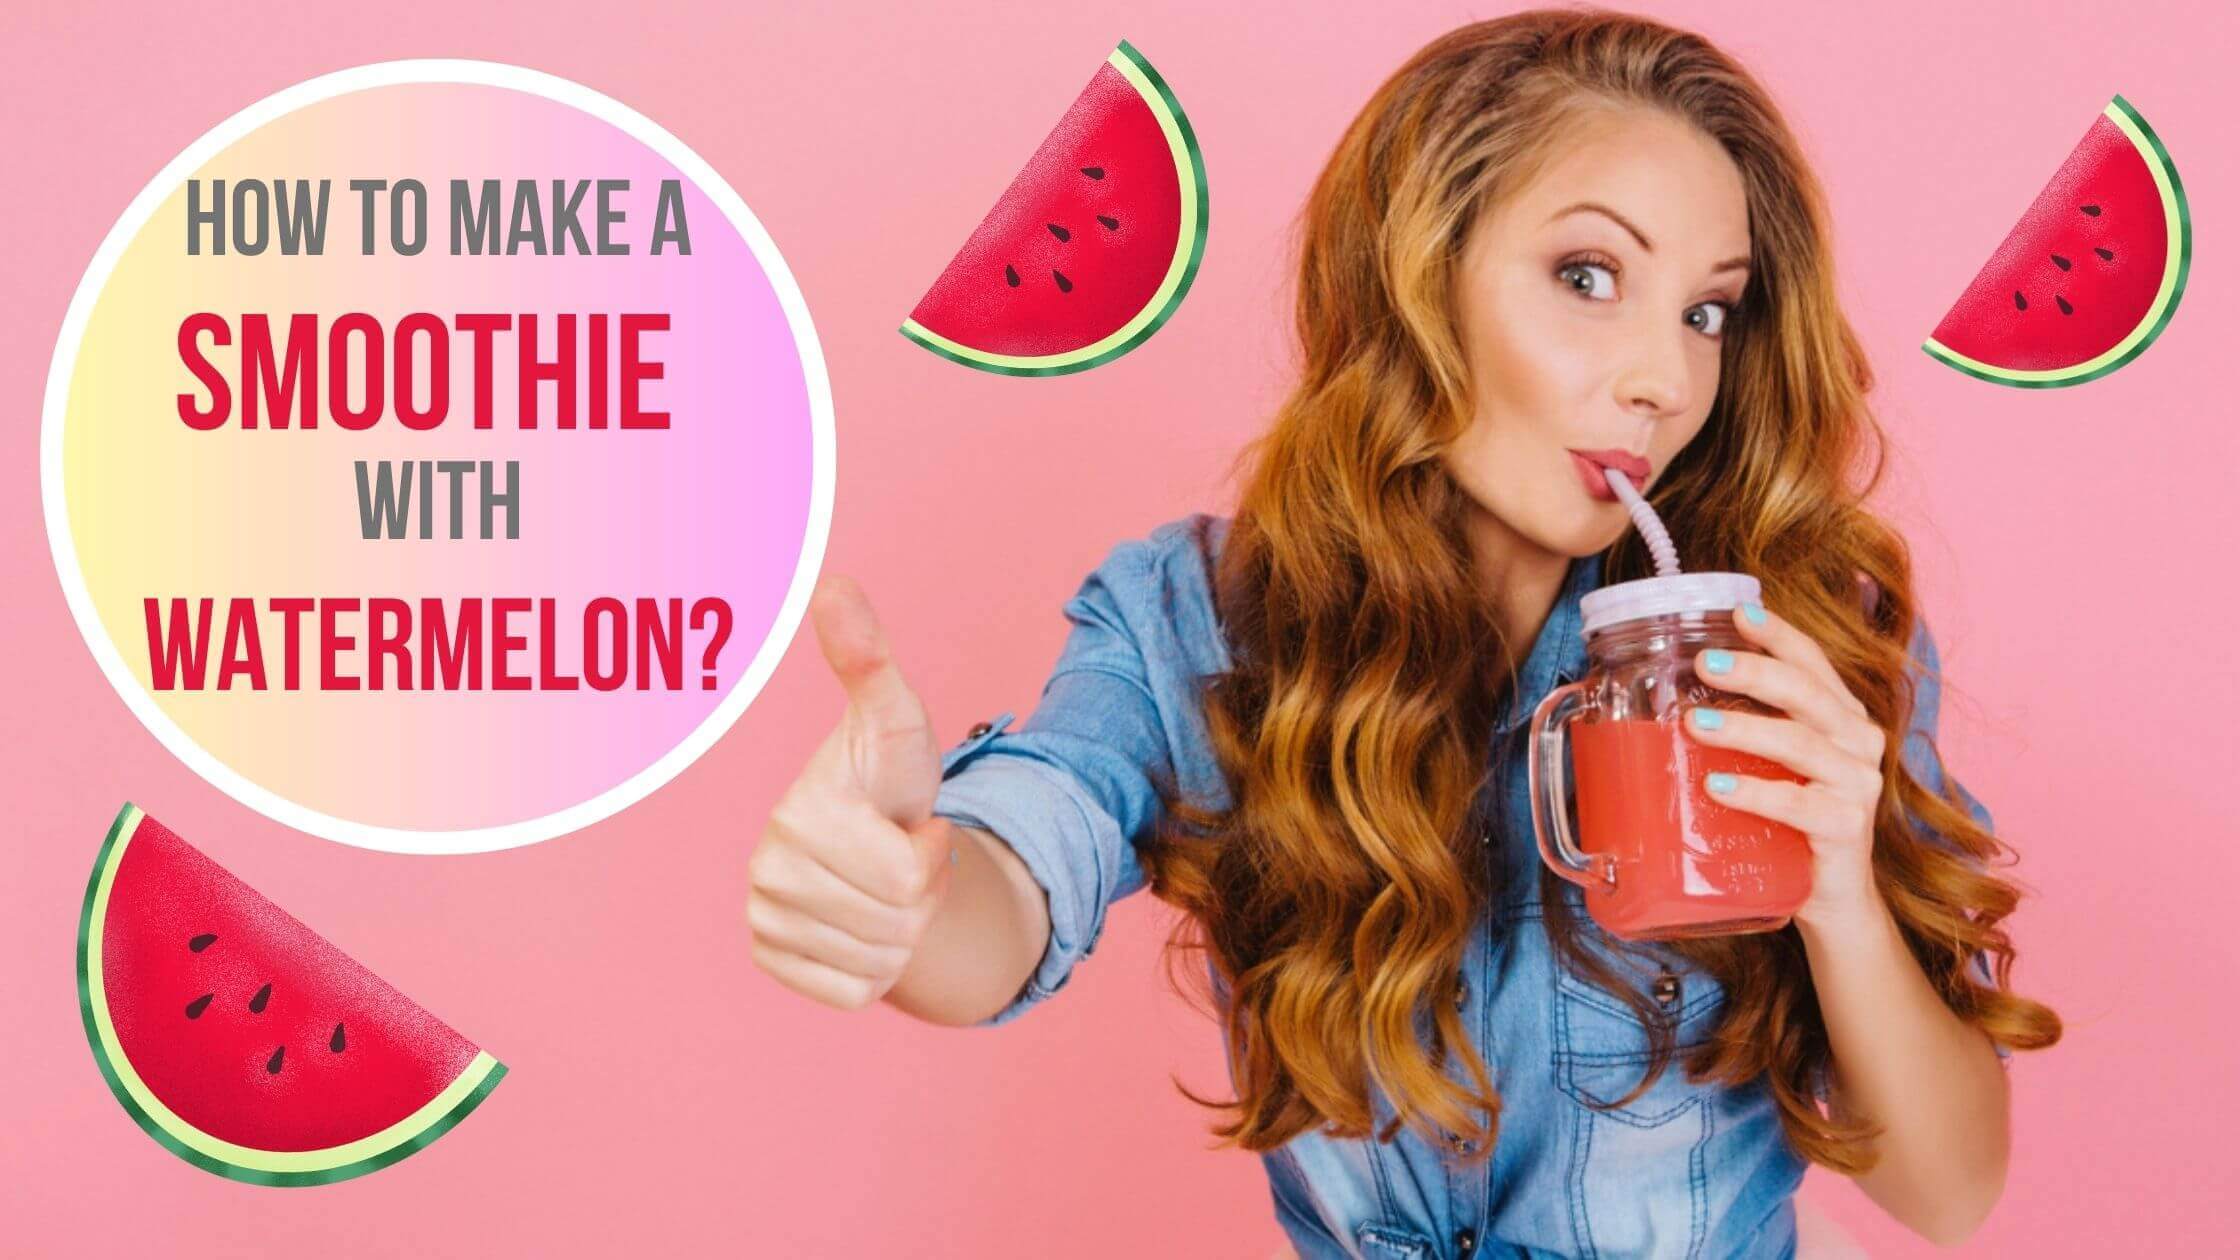 How to Make a Smoothie with Watermelon